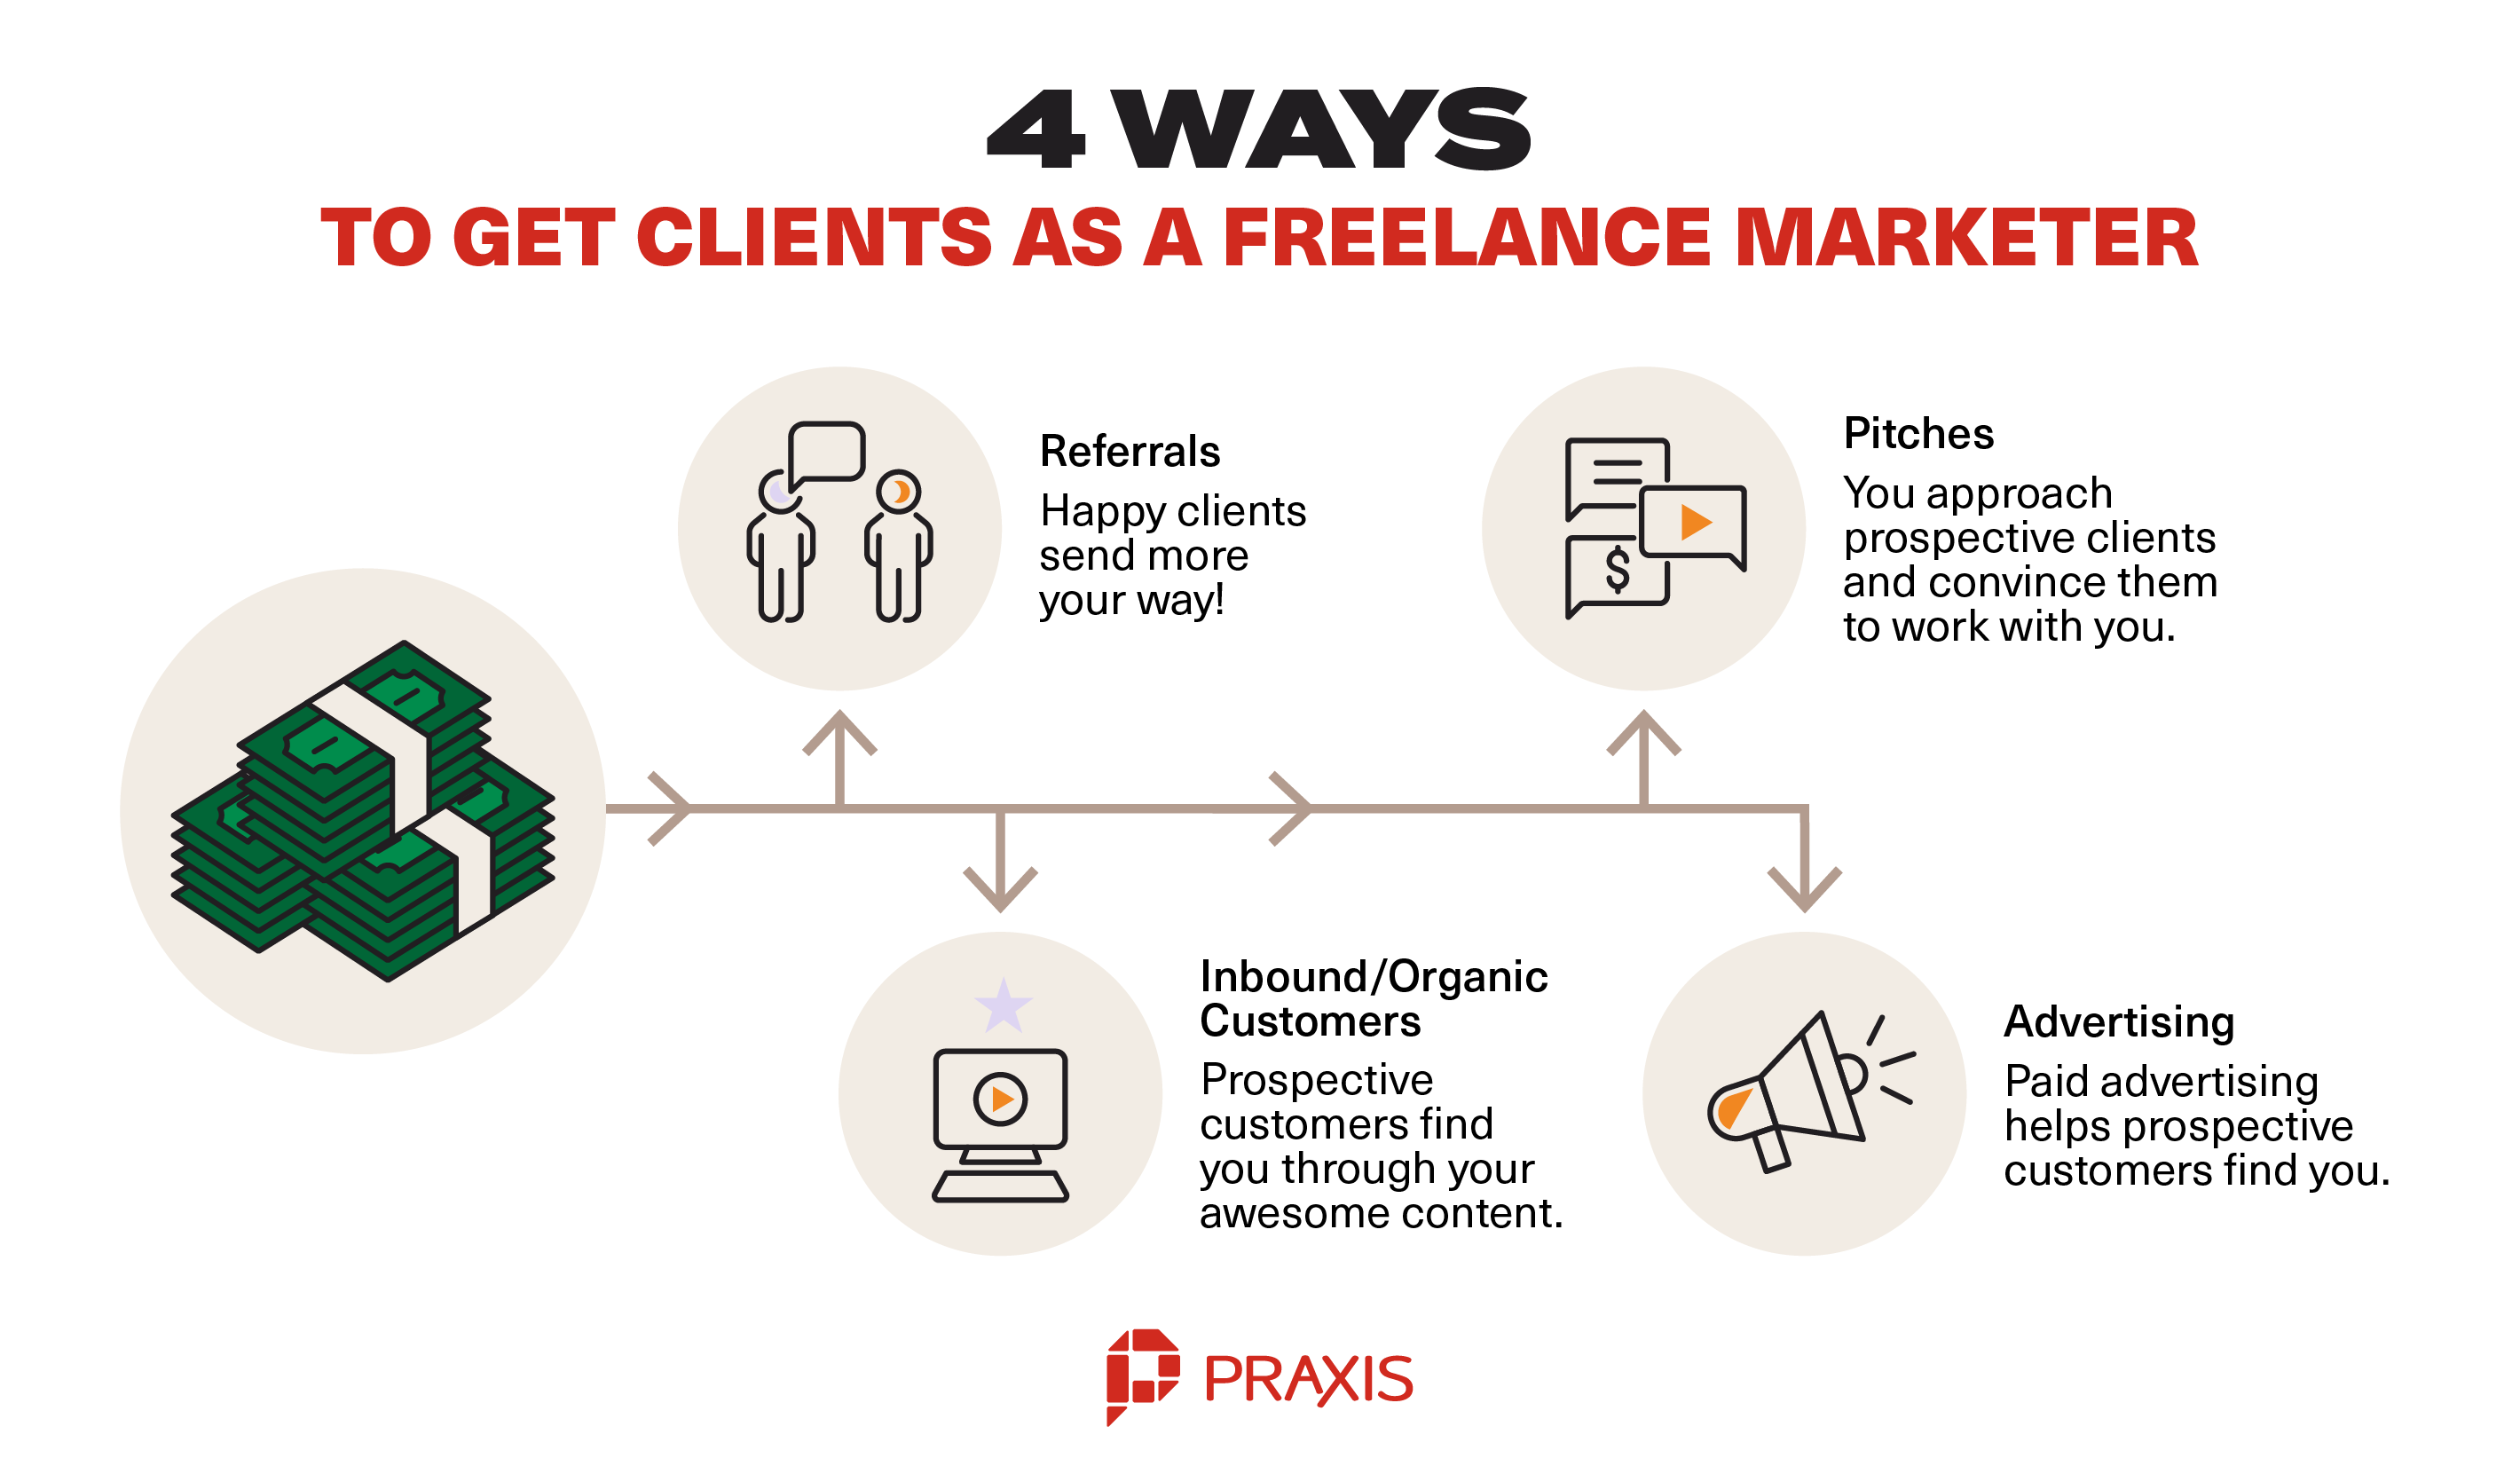 4 ways to clients as a freelance marketer